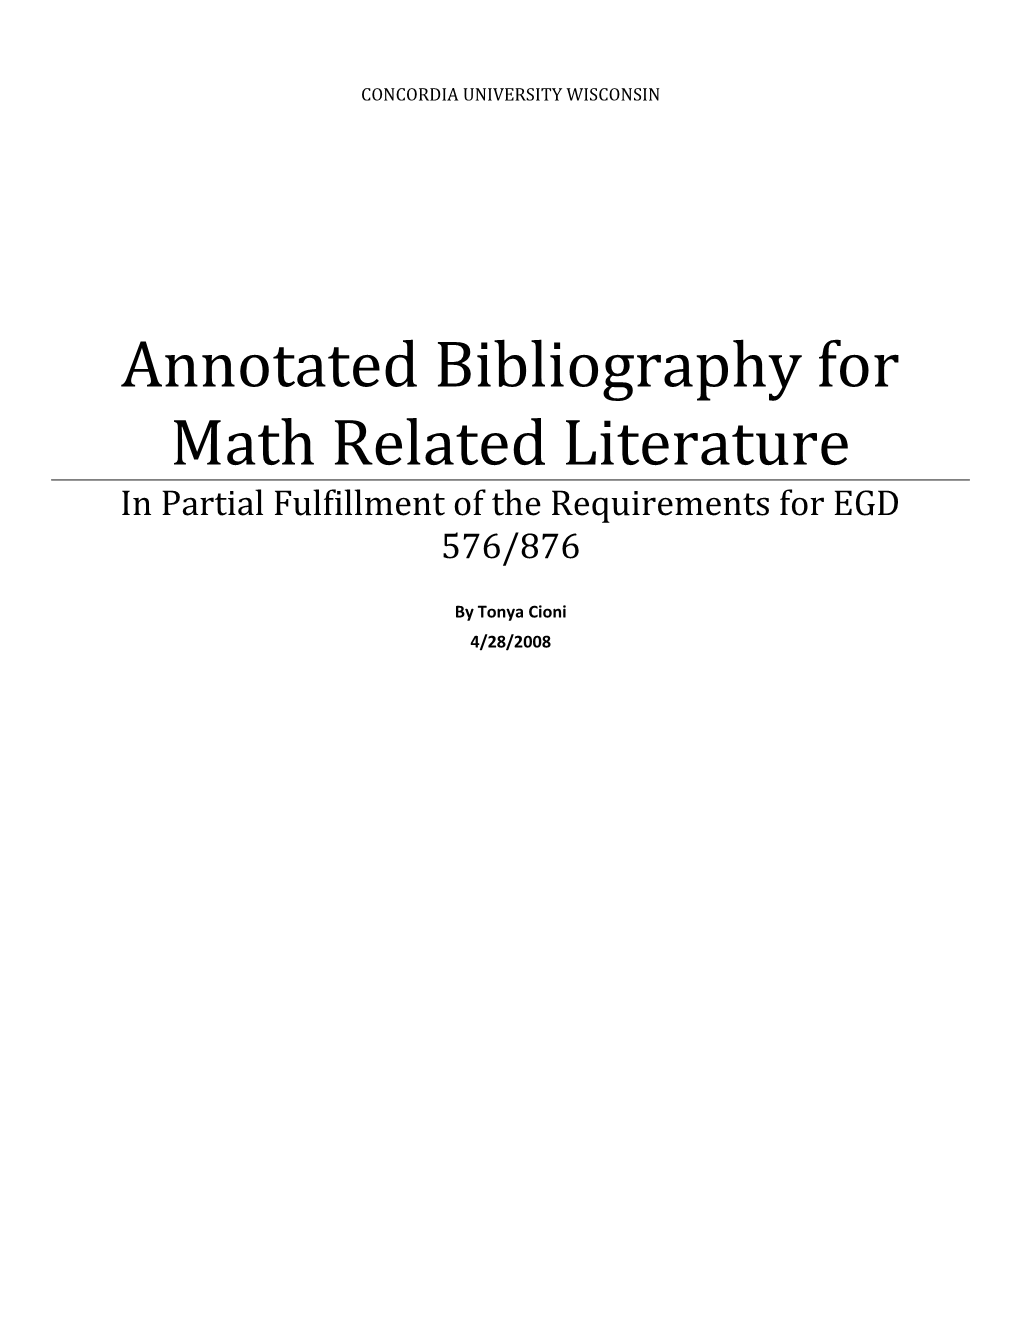 Annotated Bibliography for Math Related Literature